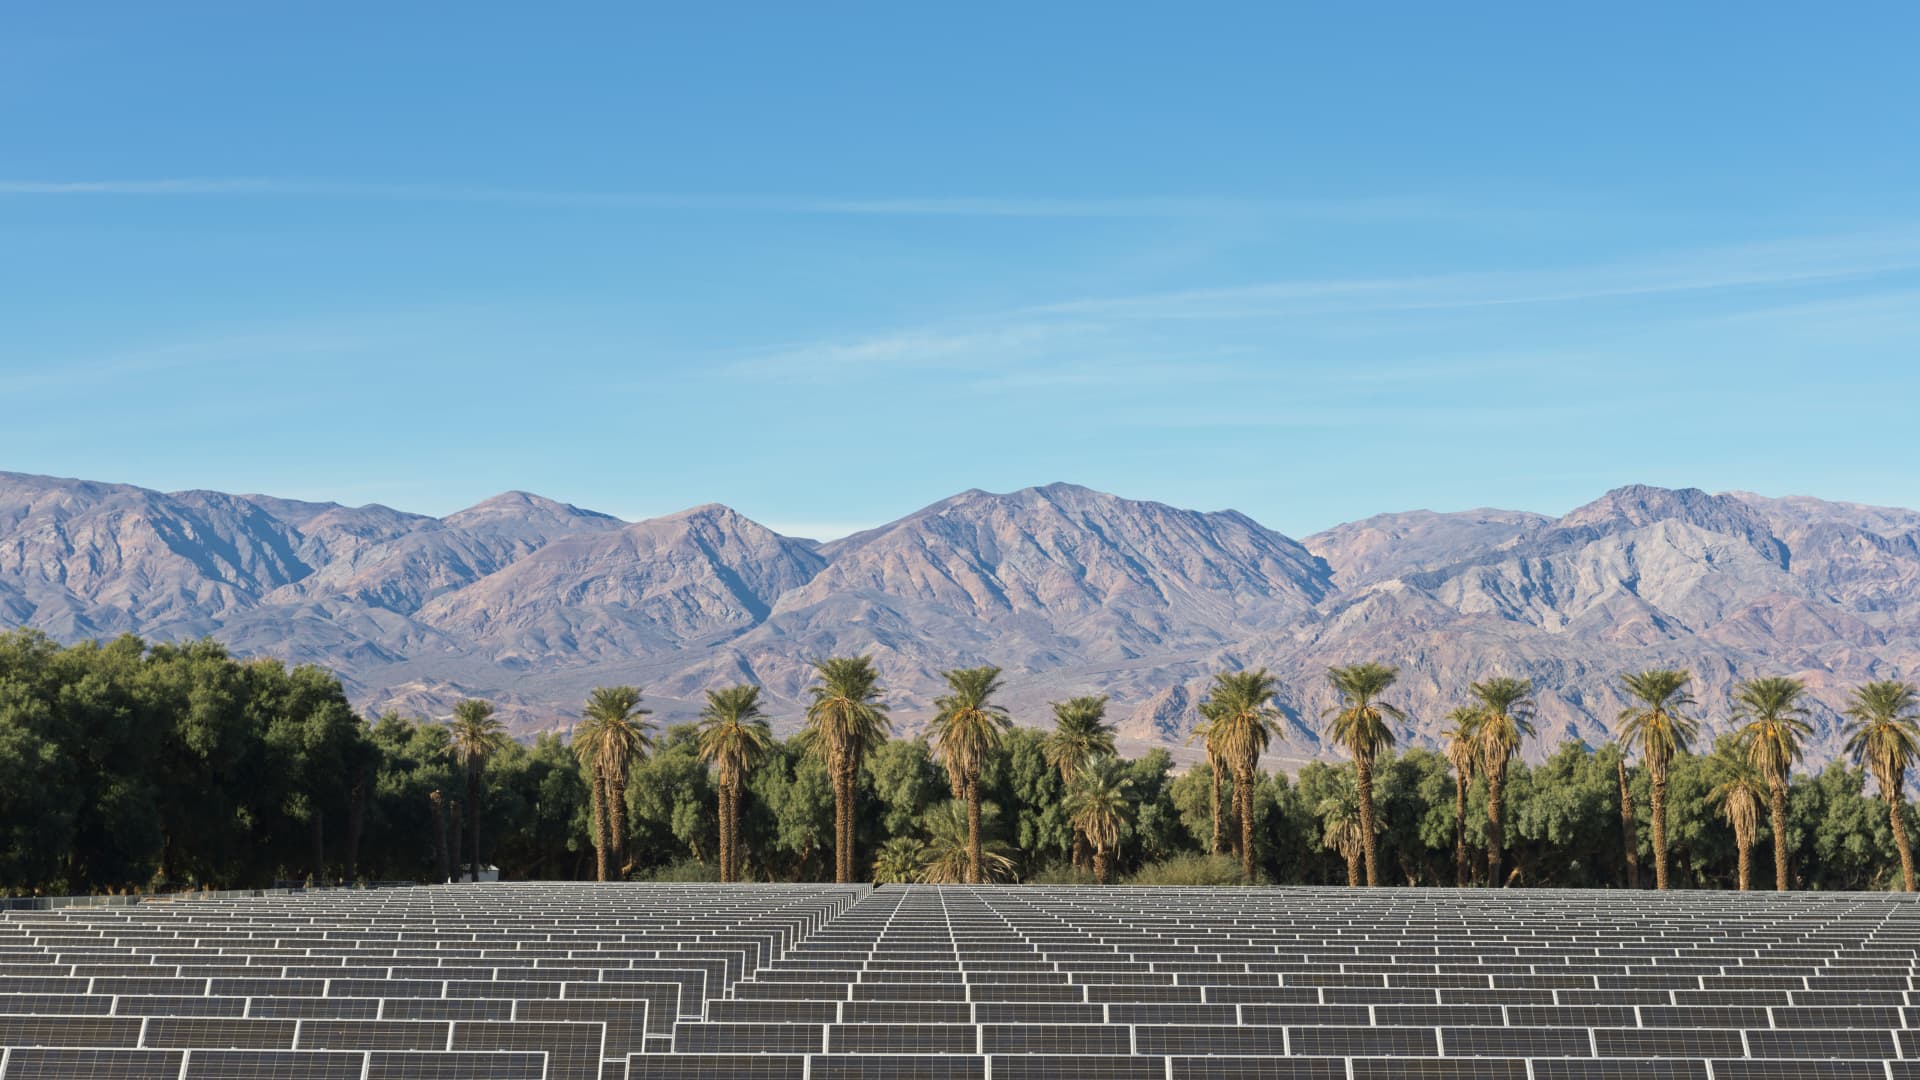 More than half of 2022's solar projects threatened by spiking costs, new report finds